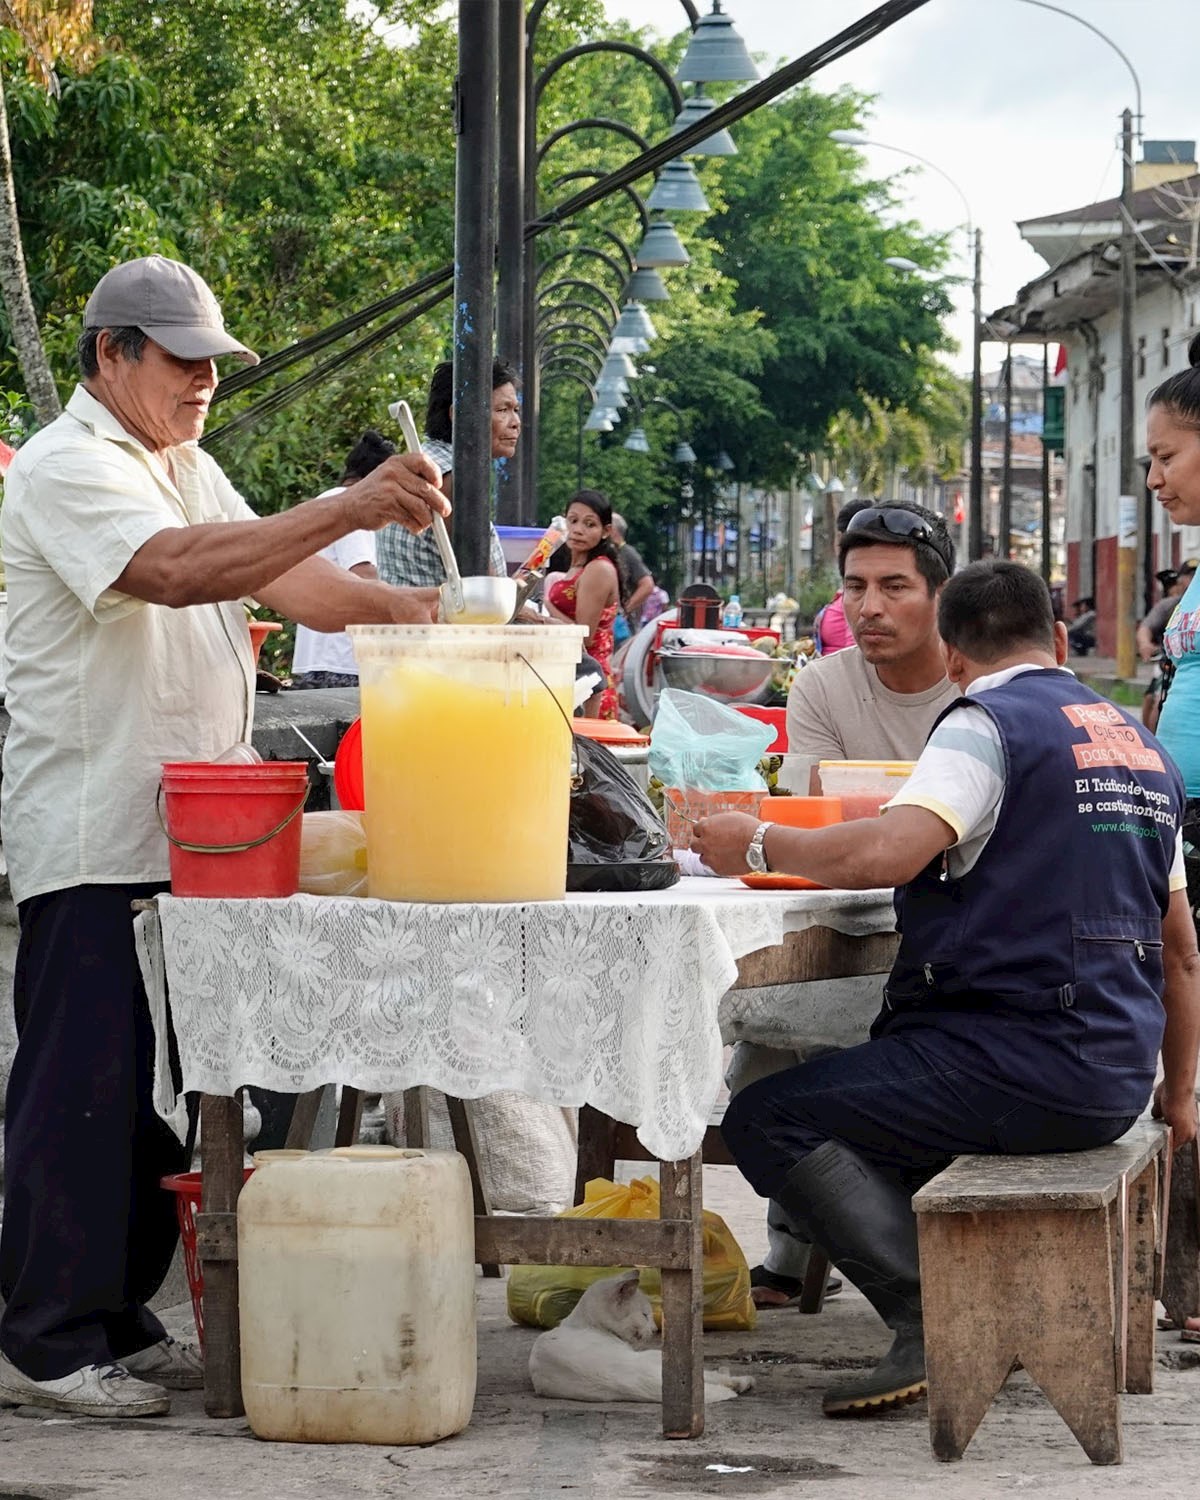 Refreshment on the streets of Iquitos - 